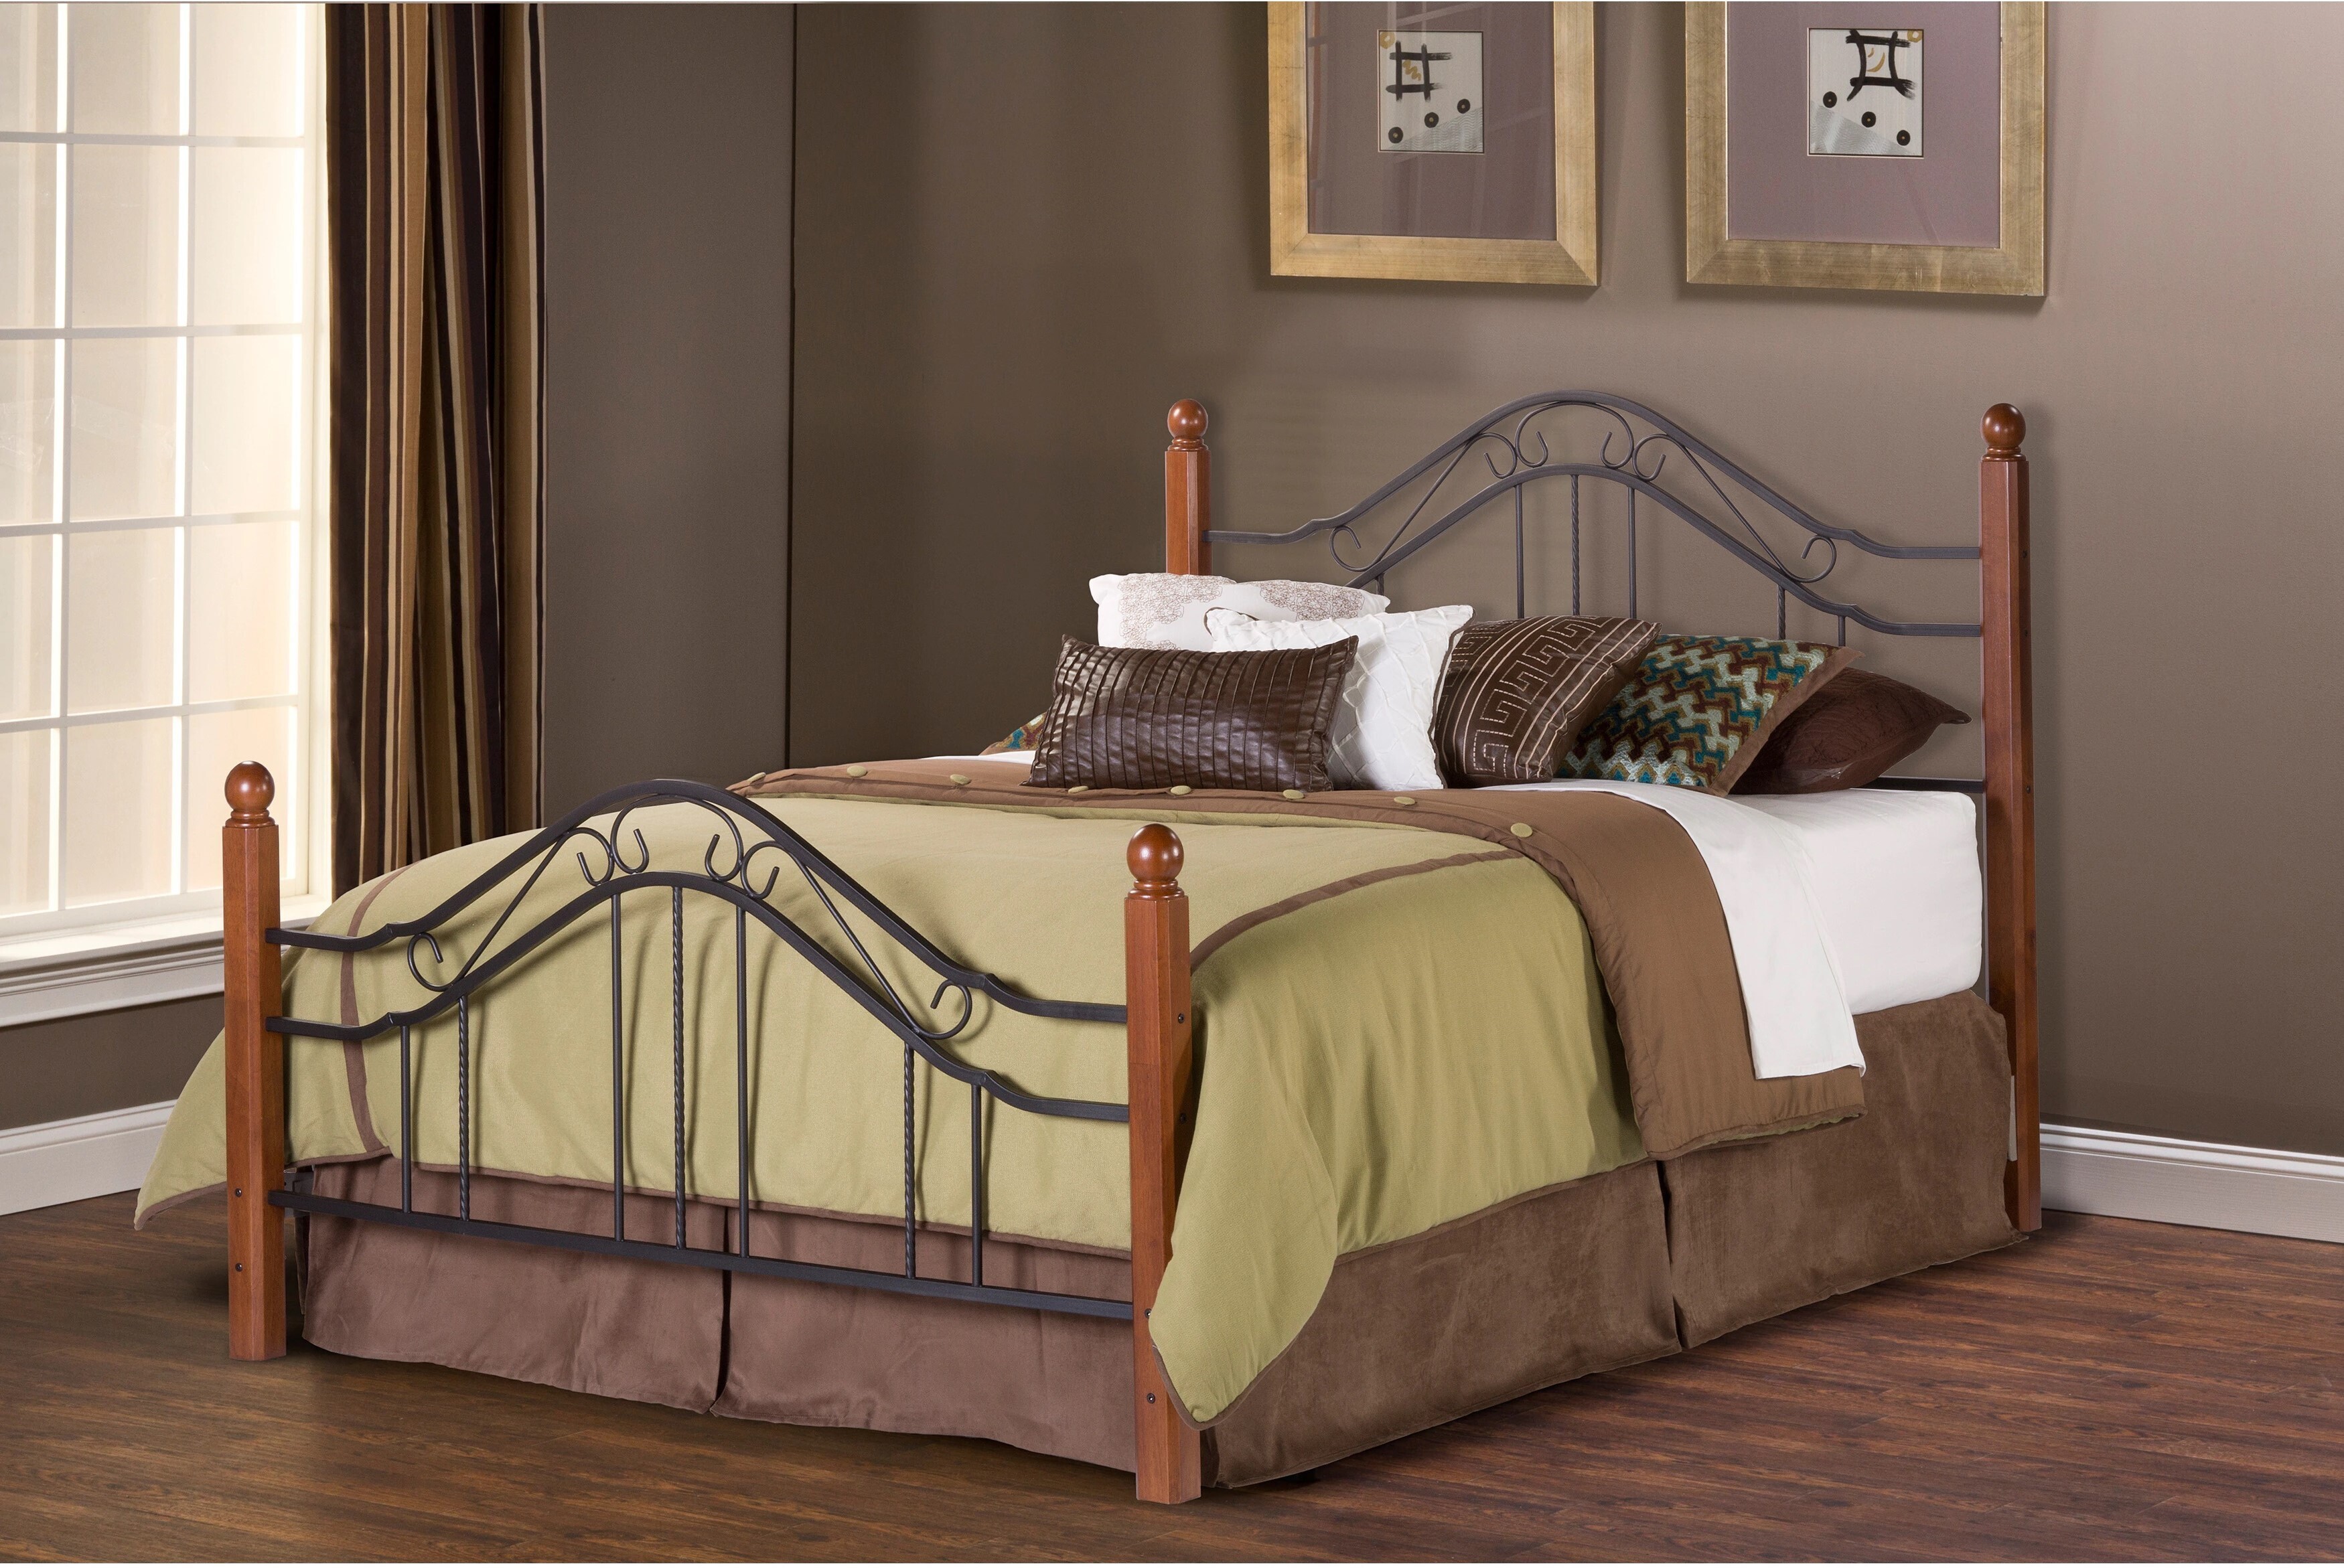 A wrought iron bed frame with sturdy wooden posts